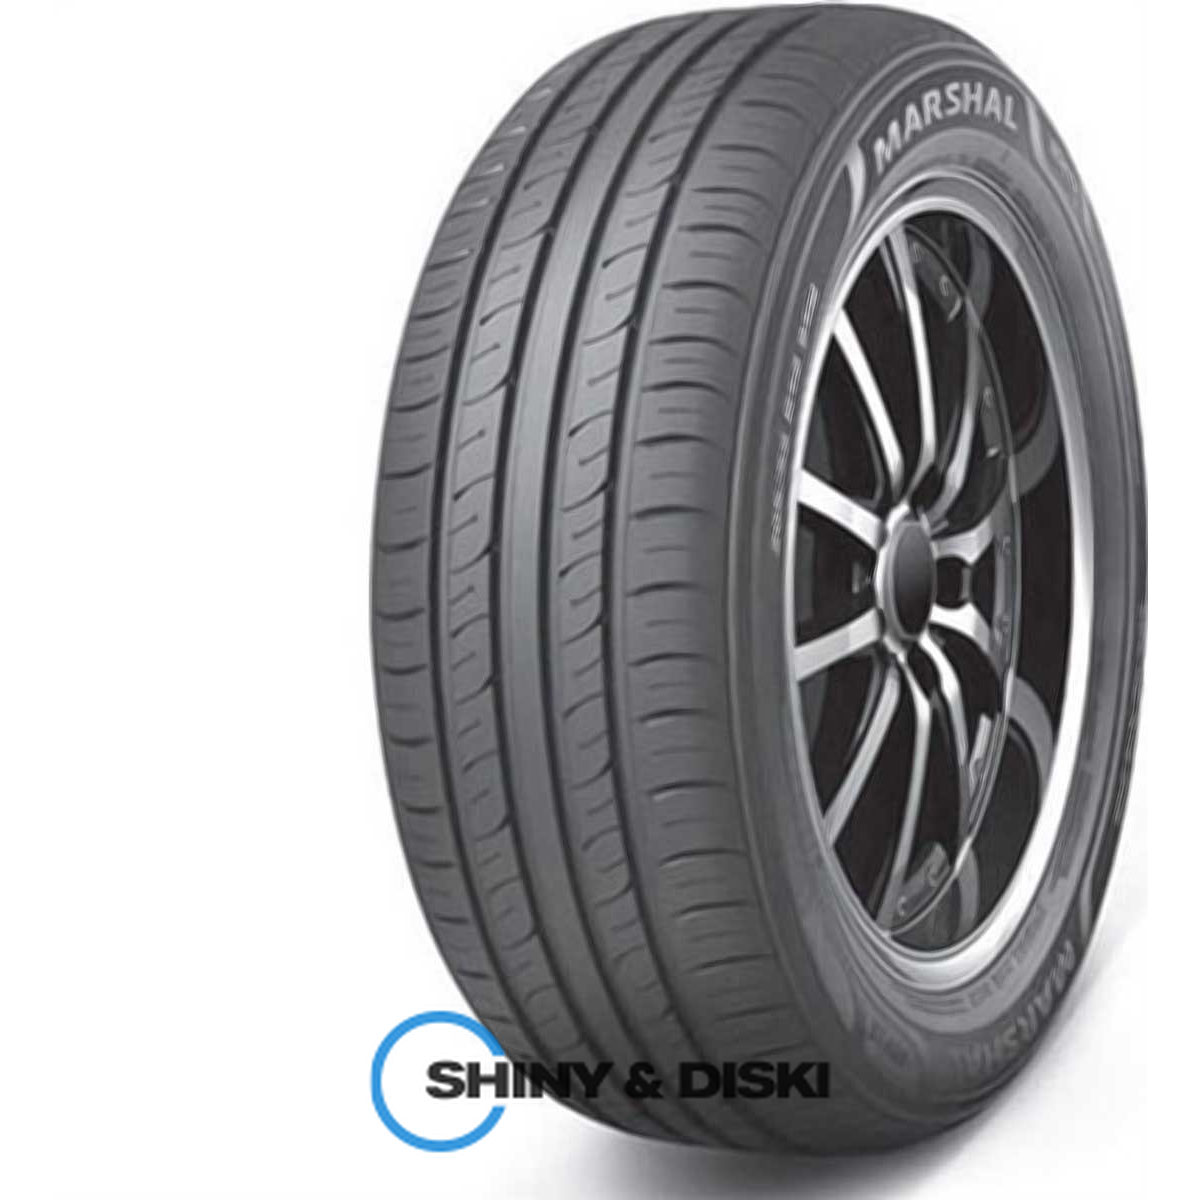 marshal mh12 185/65 r15 92t